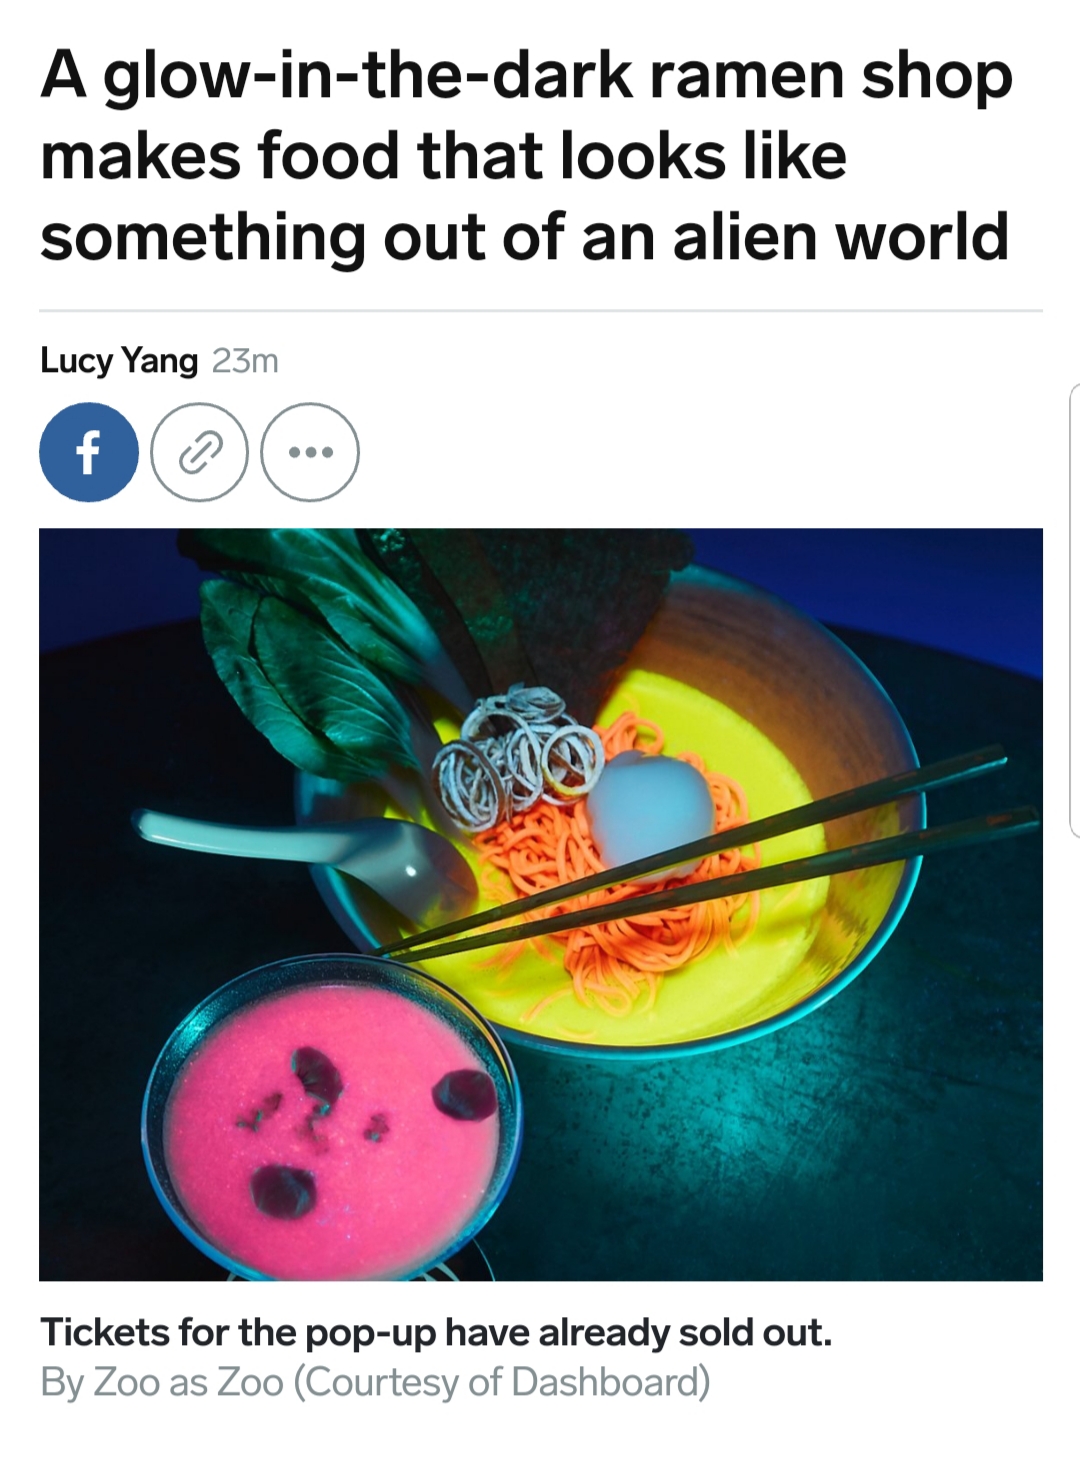 glow in the dark ramen - A glowinthedark ramen shop makes food that looks something out of an alien world Lucy Yang 23m f . Tickets for the popup have already sold out. By Zoo as Zoo Courtesy of Dashboard